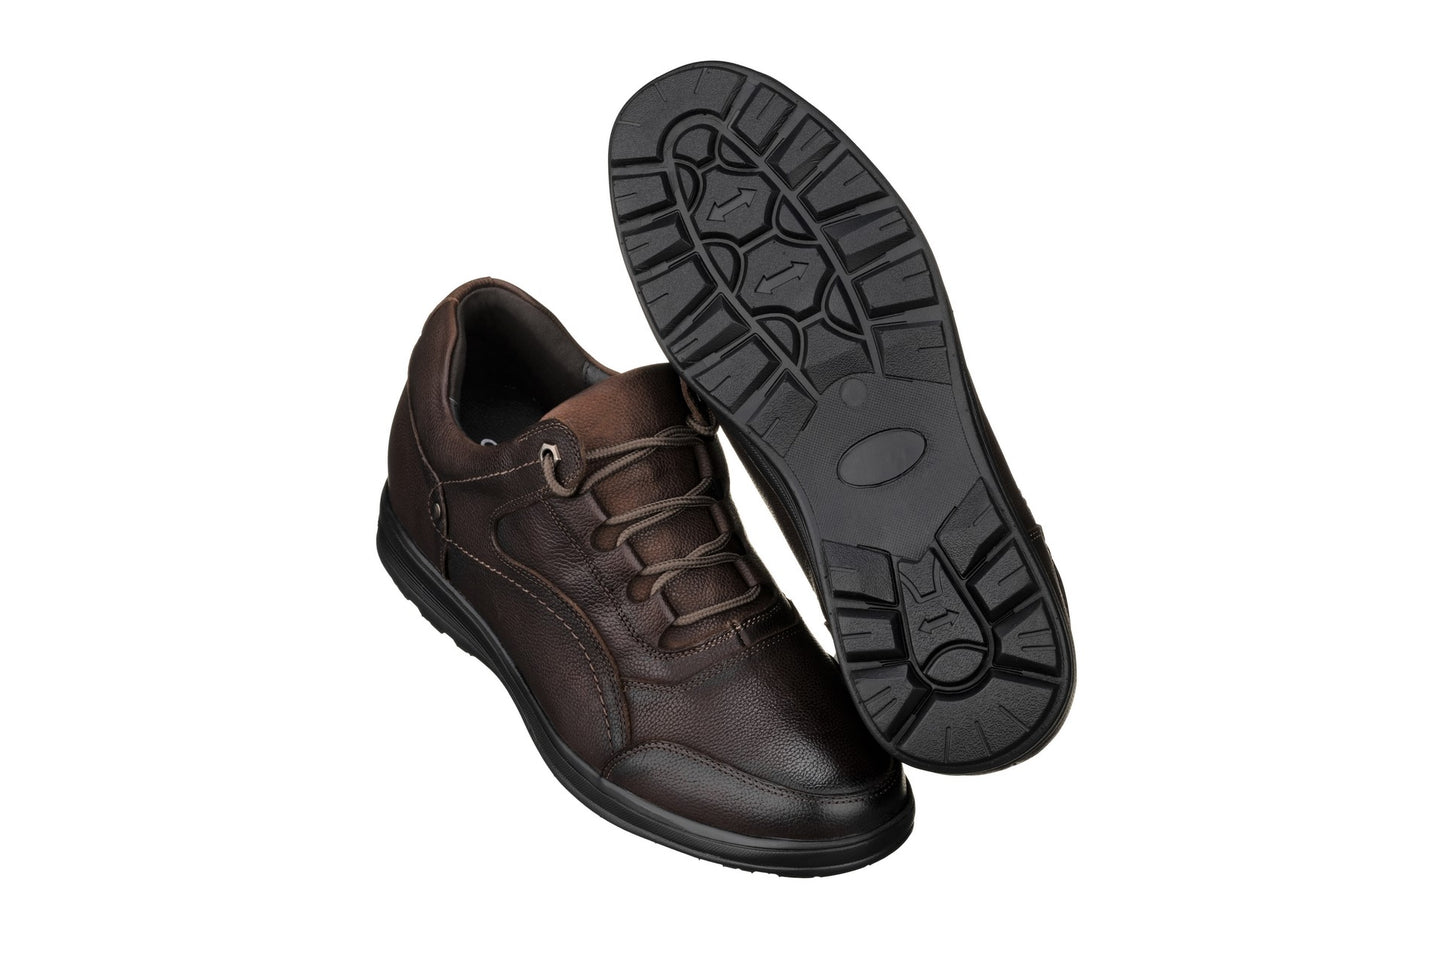 Elevator shoes height increase CALTO - K3045 - 2.8 Inches Taller (Dark Brown) - Lace Up Casual Walker - Lightweight